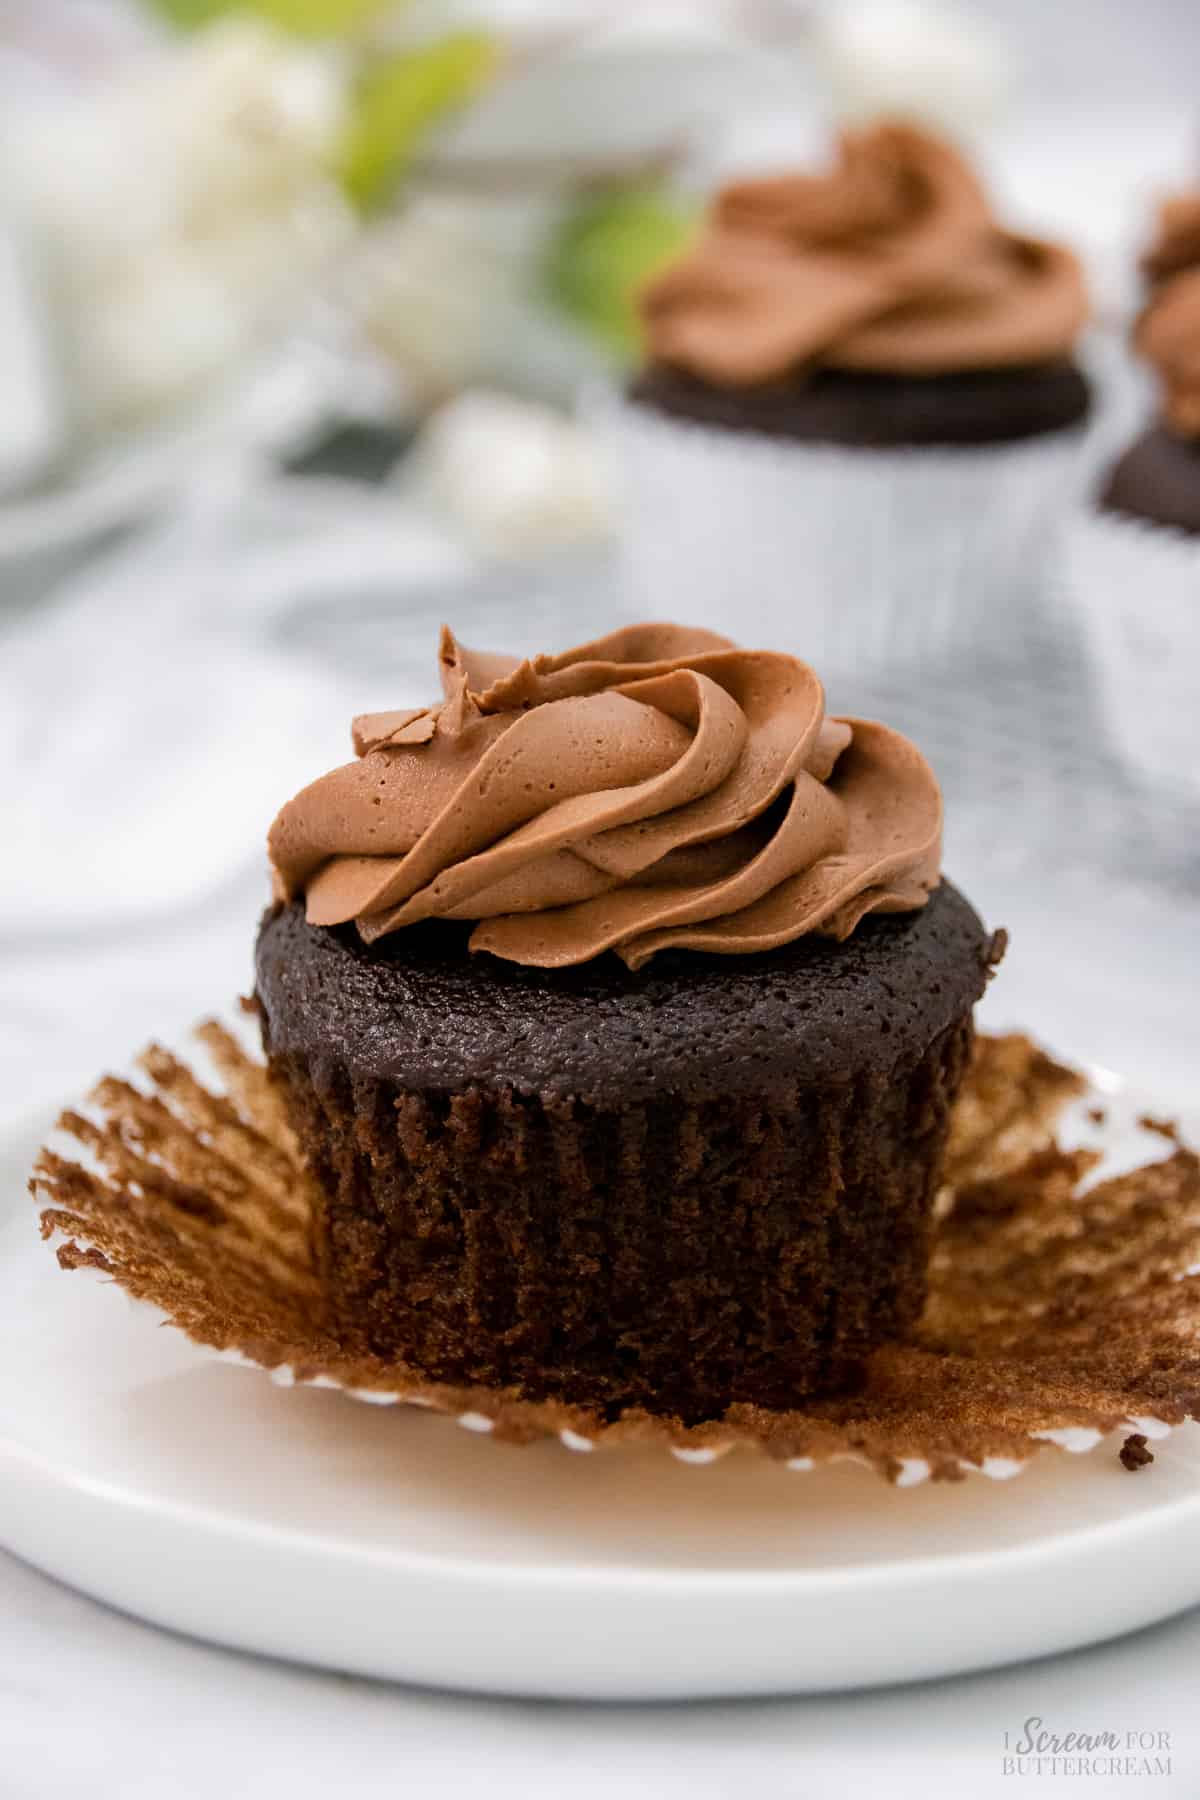 One chocolate cupcake unwrapped with chocolate frosting on top on a white plate.